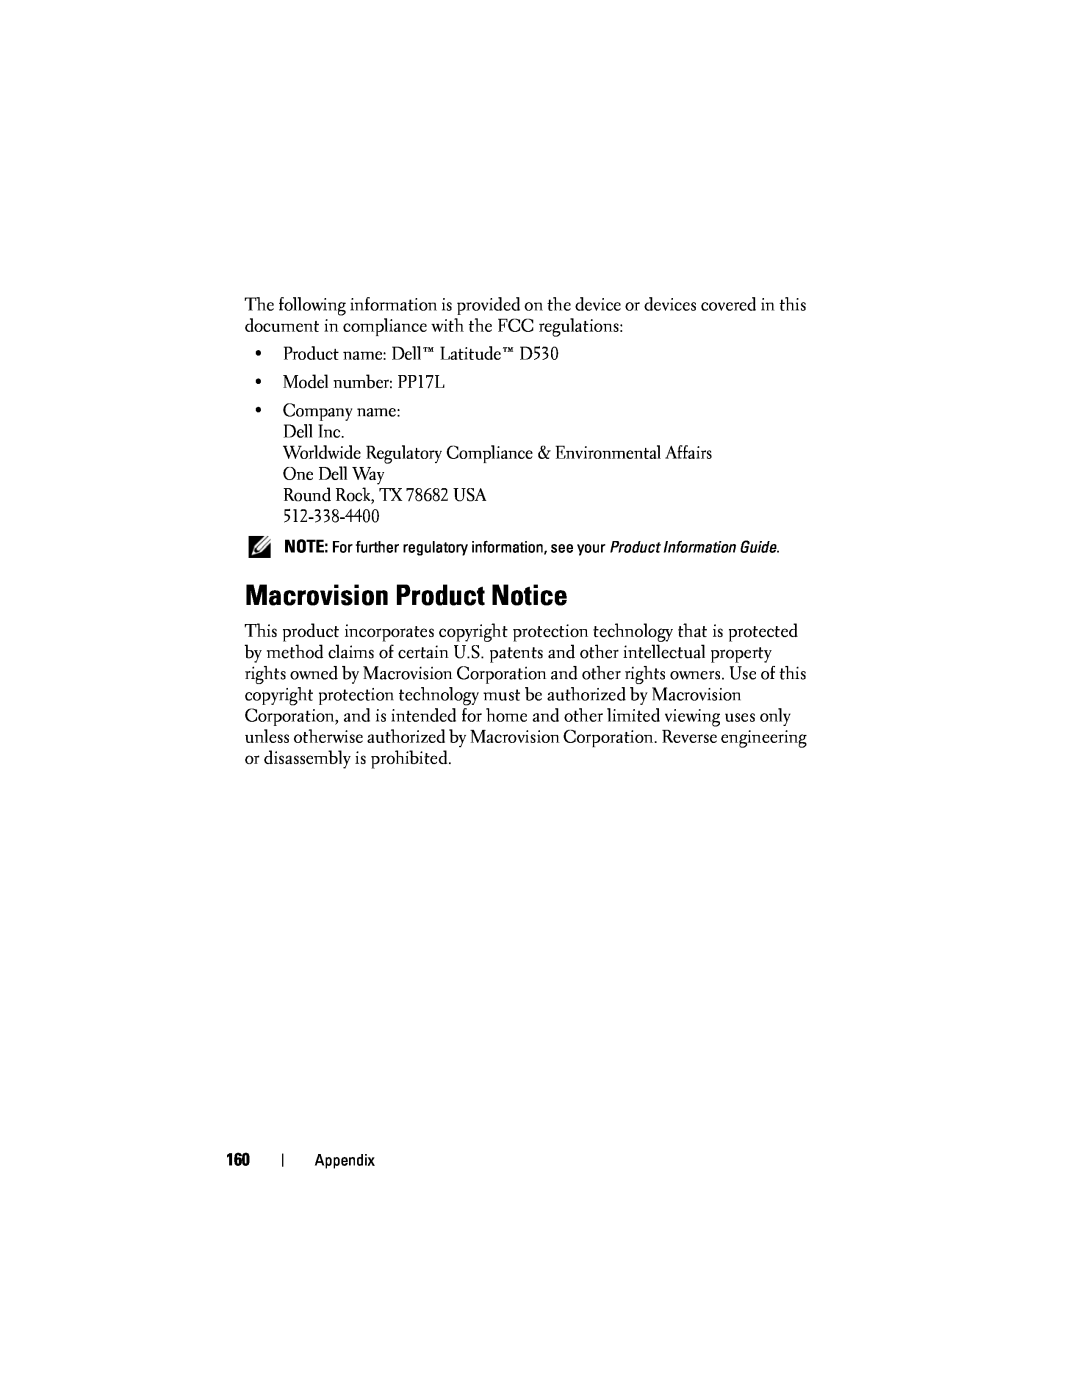 Dell D530 manual Macrovision Product Notice 